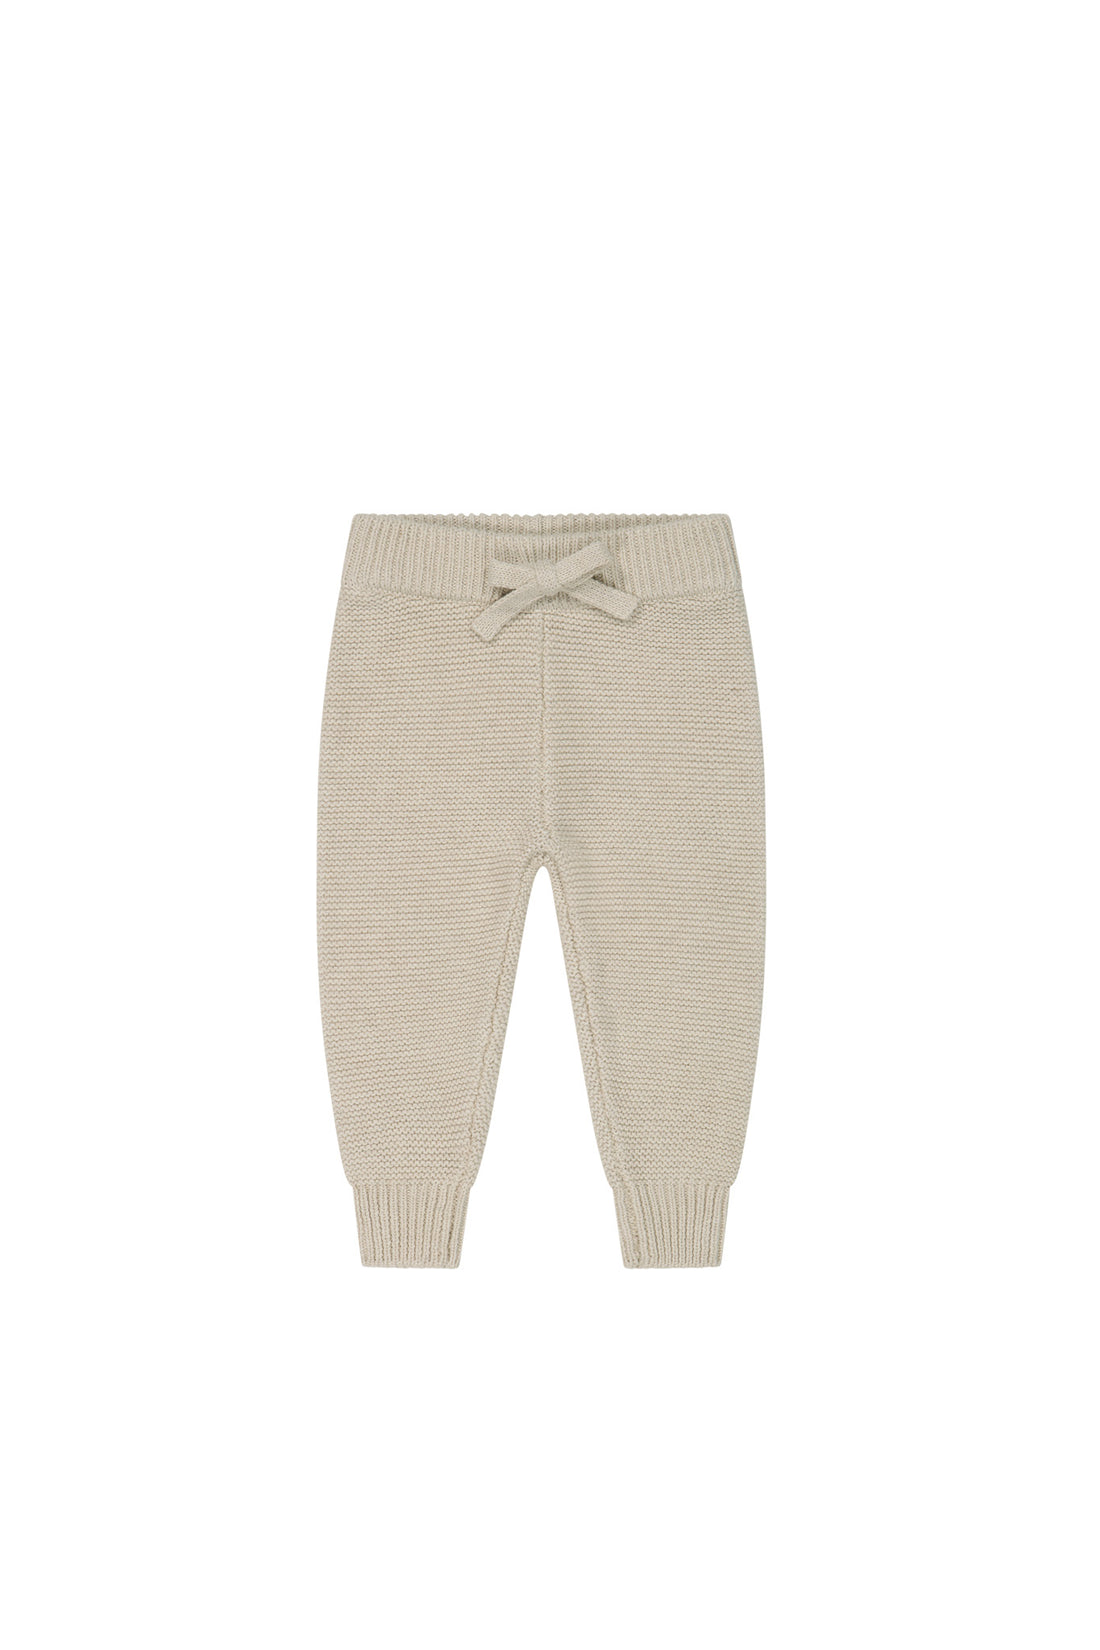 Ethan Pant - Skimming Stone Marle Childrens Pant from Jamie Kay NZ